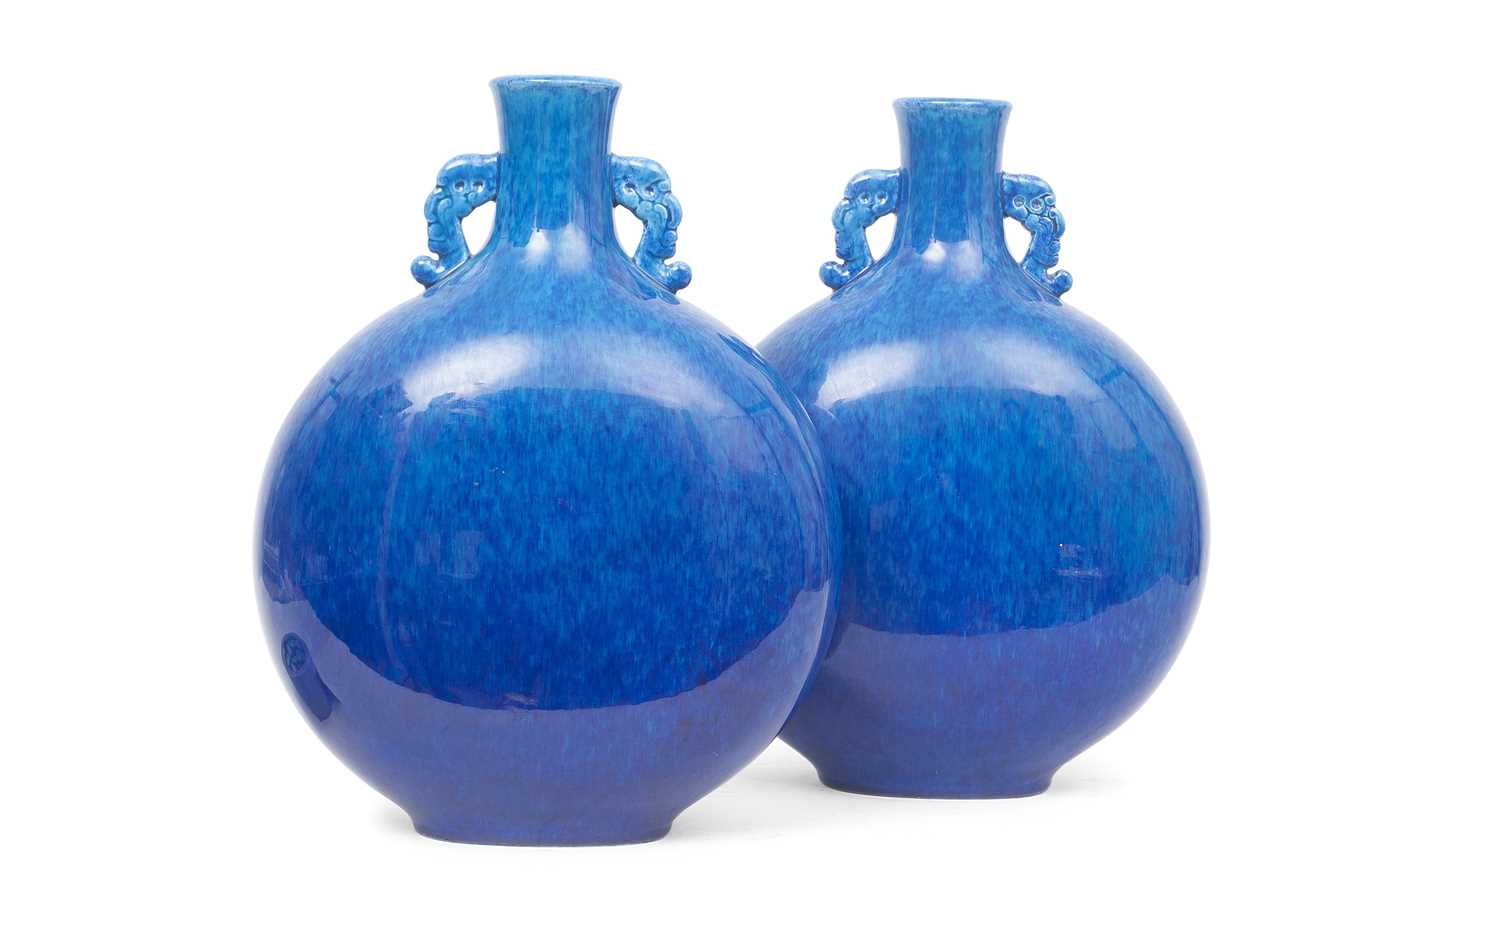 A LARGE PAIR OF 19TH CENTURY SEVRES PORCELAIN MOON FLASK VASES BY PAUL MILET